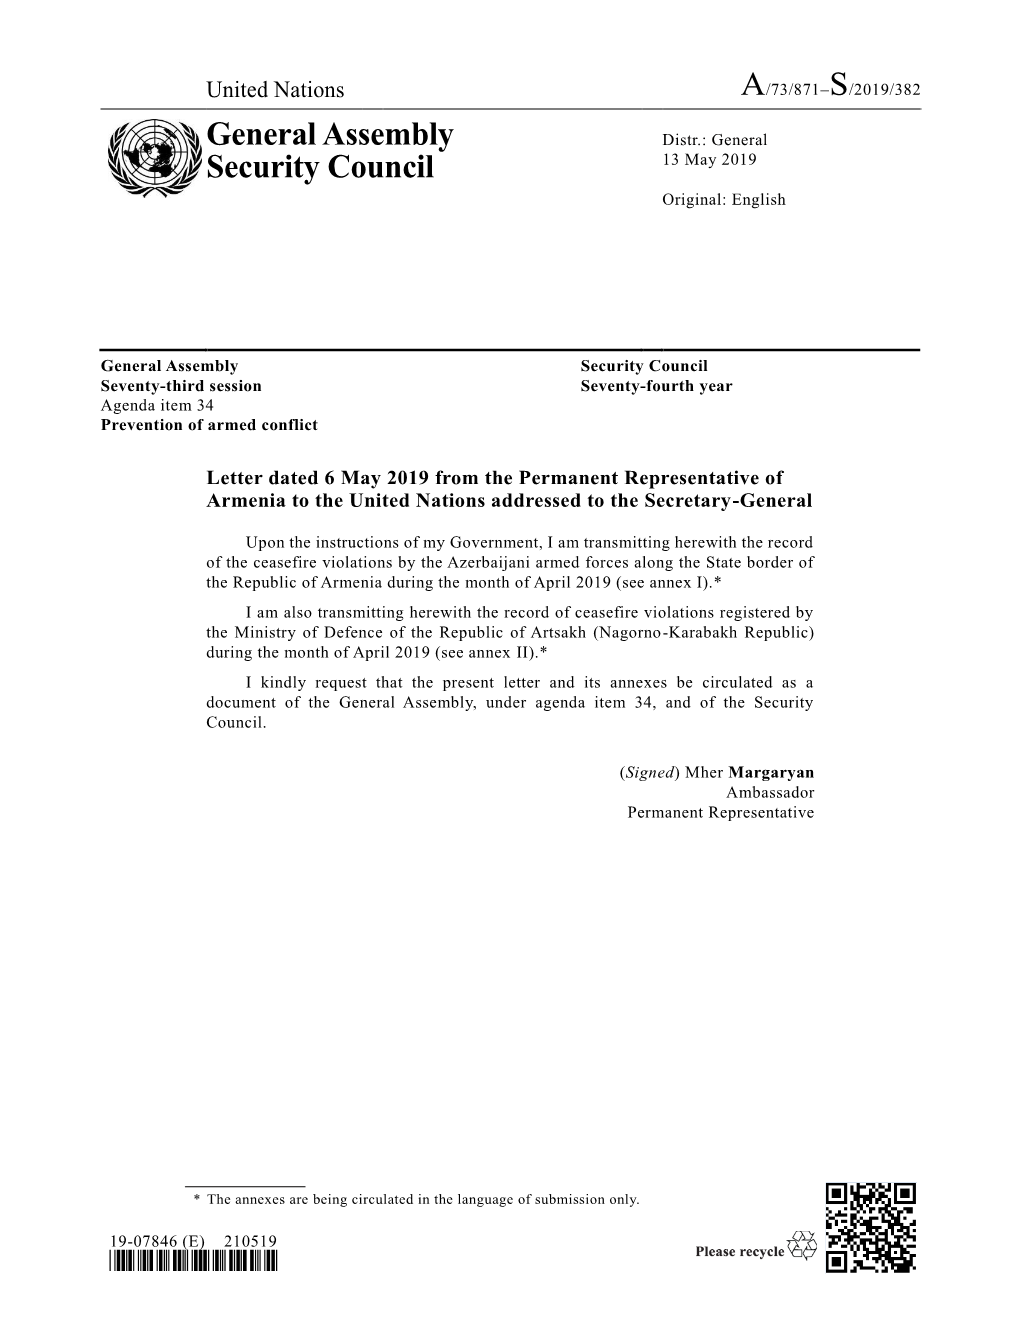 General Assembly Security Council Seventy-Third Session Seventy-Fourth Year Agenda Item 34 Prevention of Armed Conflict